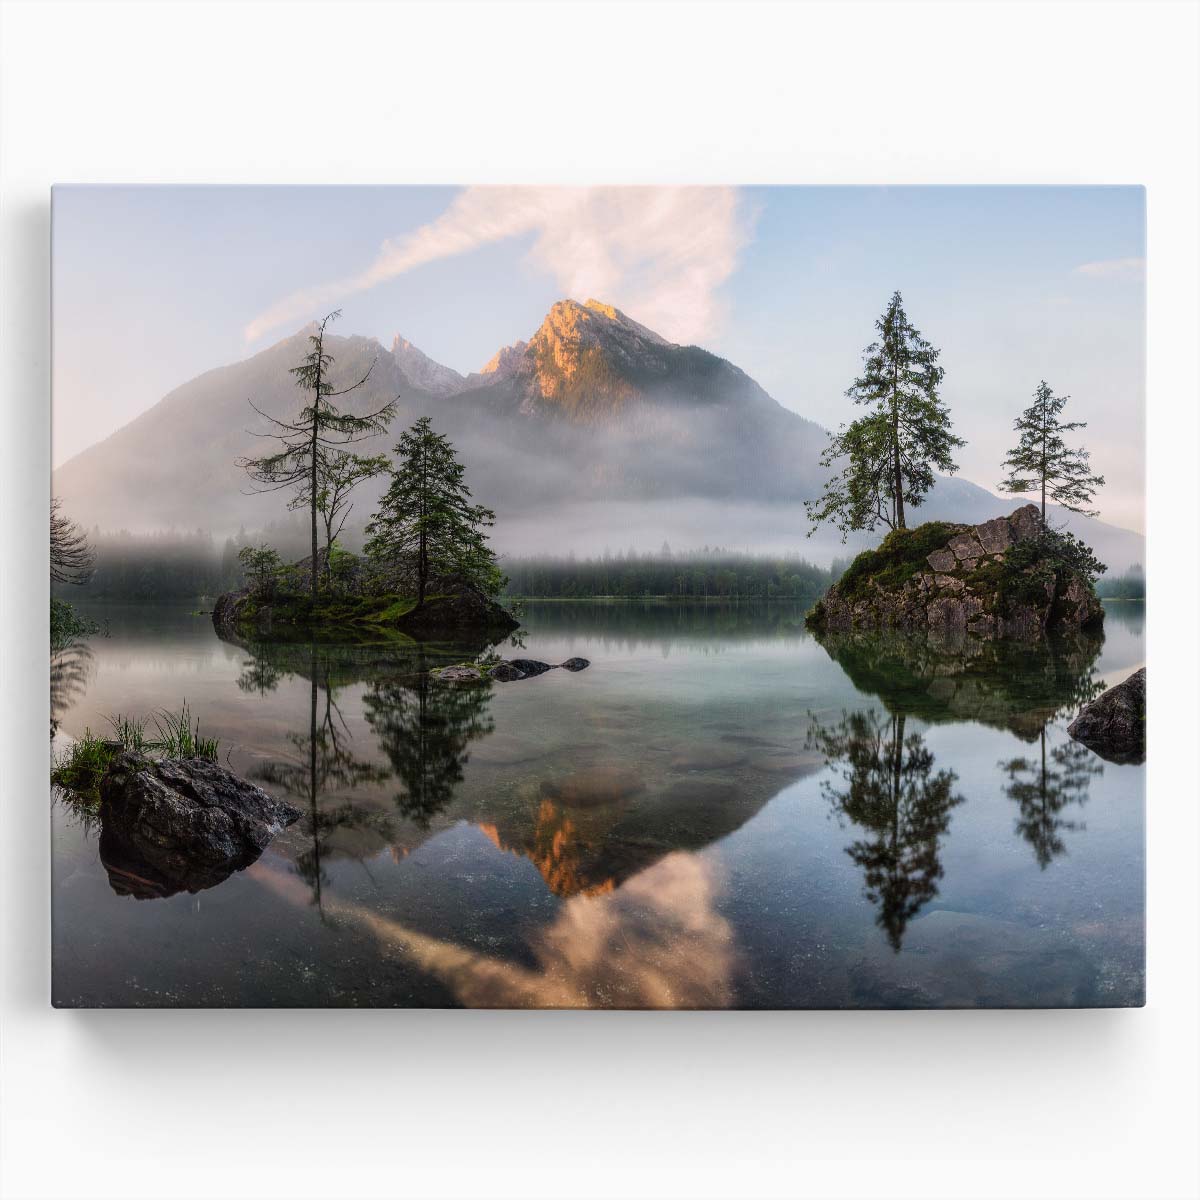 Serene Sunrise Landscape Misty Mountain Reflection Art Wall Art by Luxuriance Designs. Made in USA.